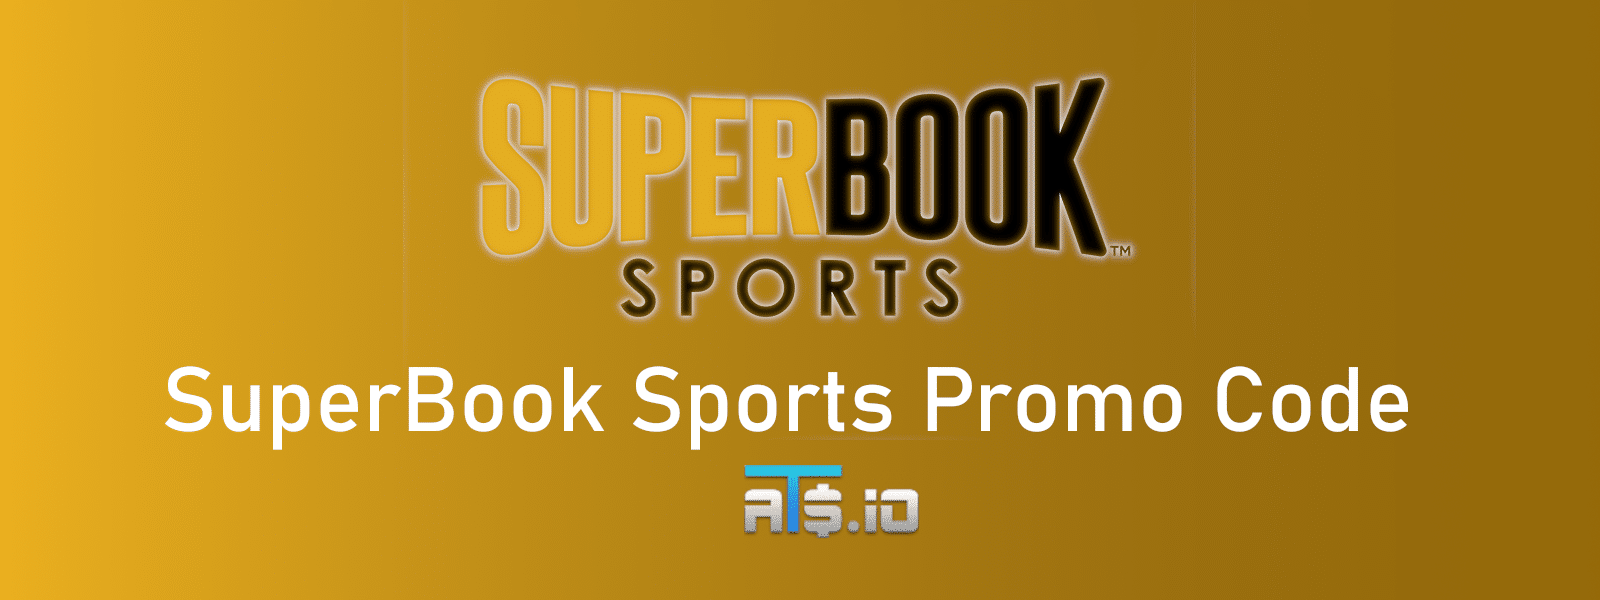 SuperBook Promo Code: Every First Bet Wins New User Bonus Up to $250